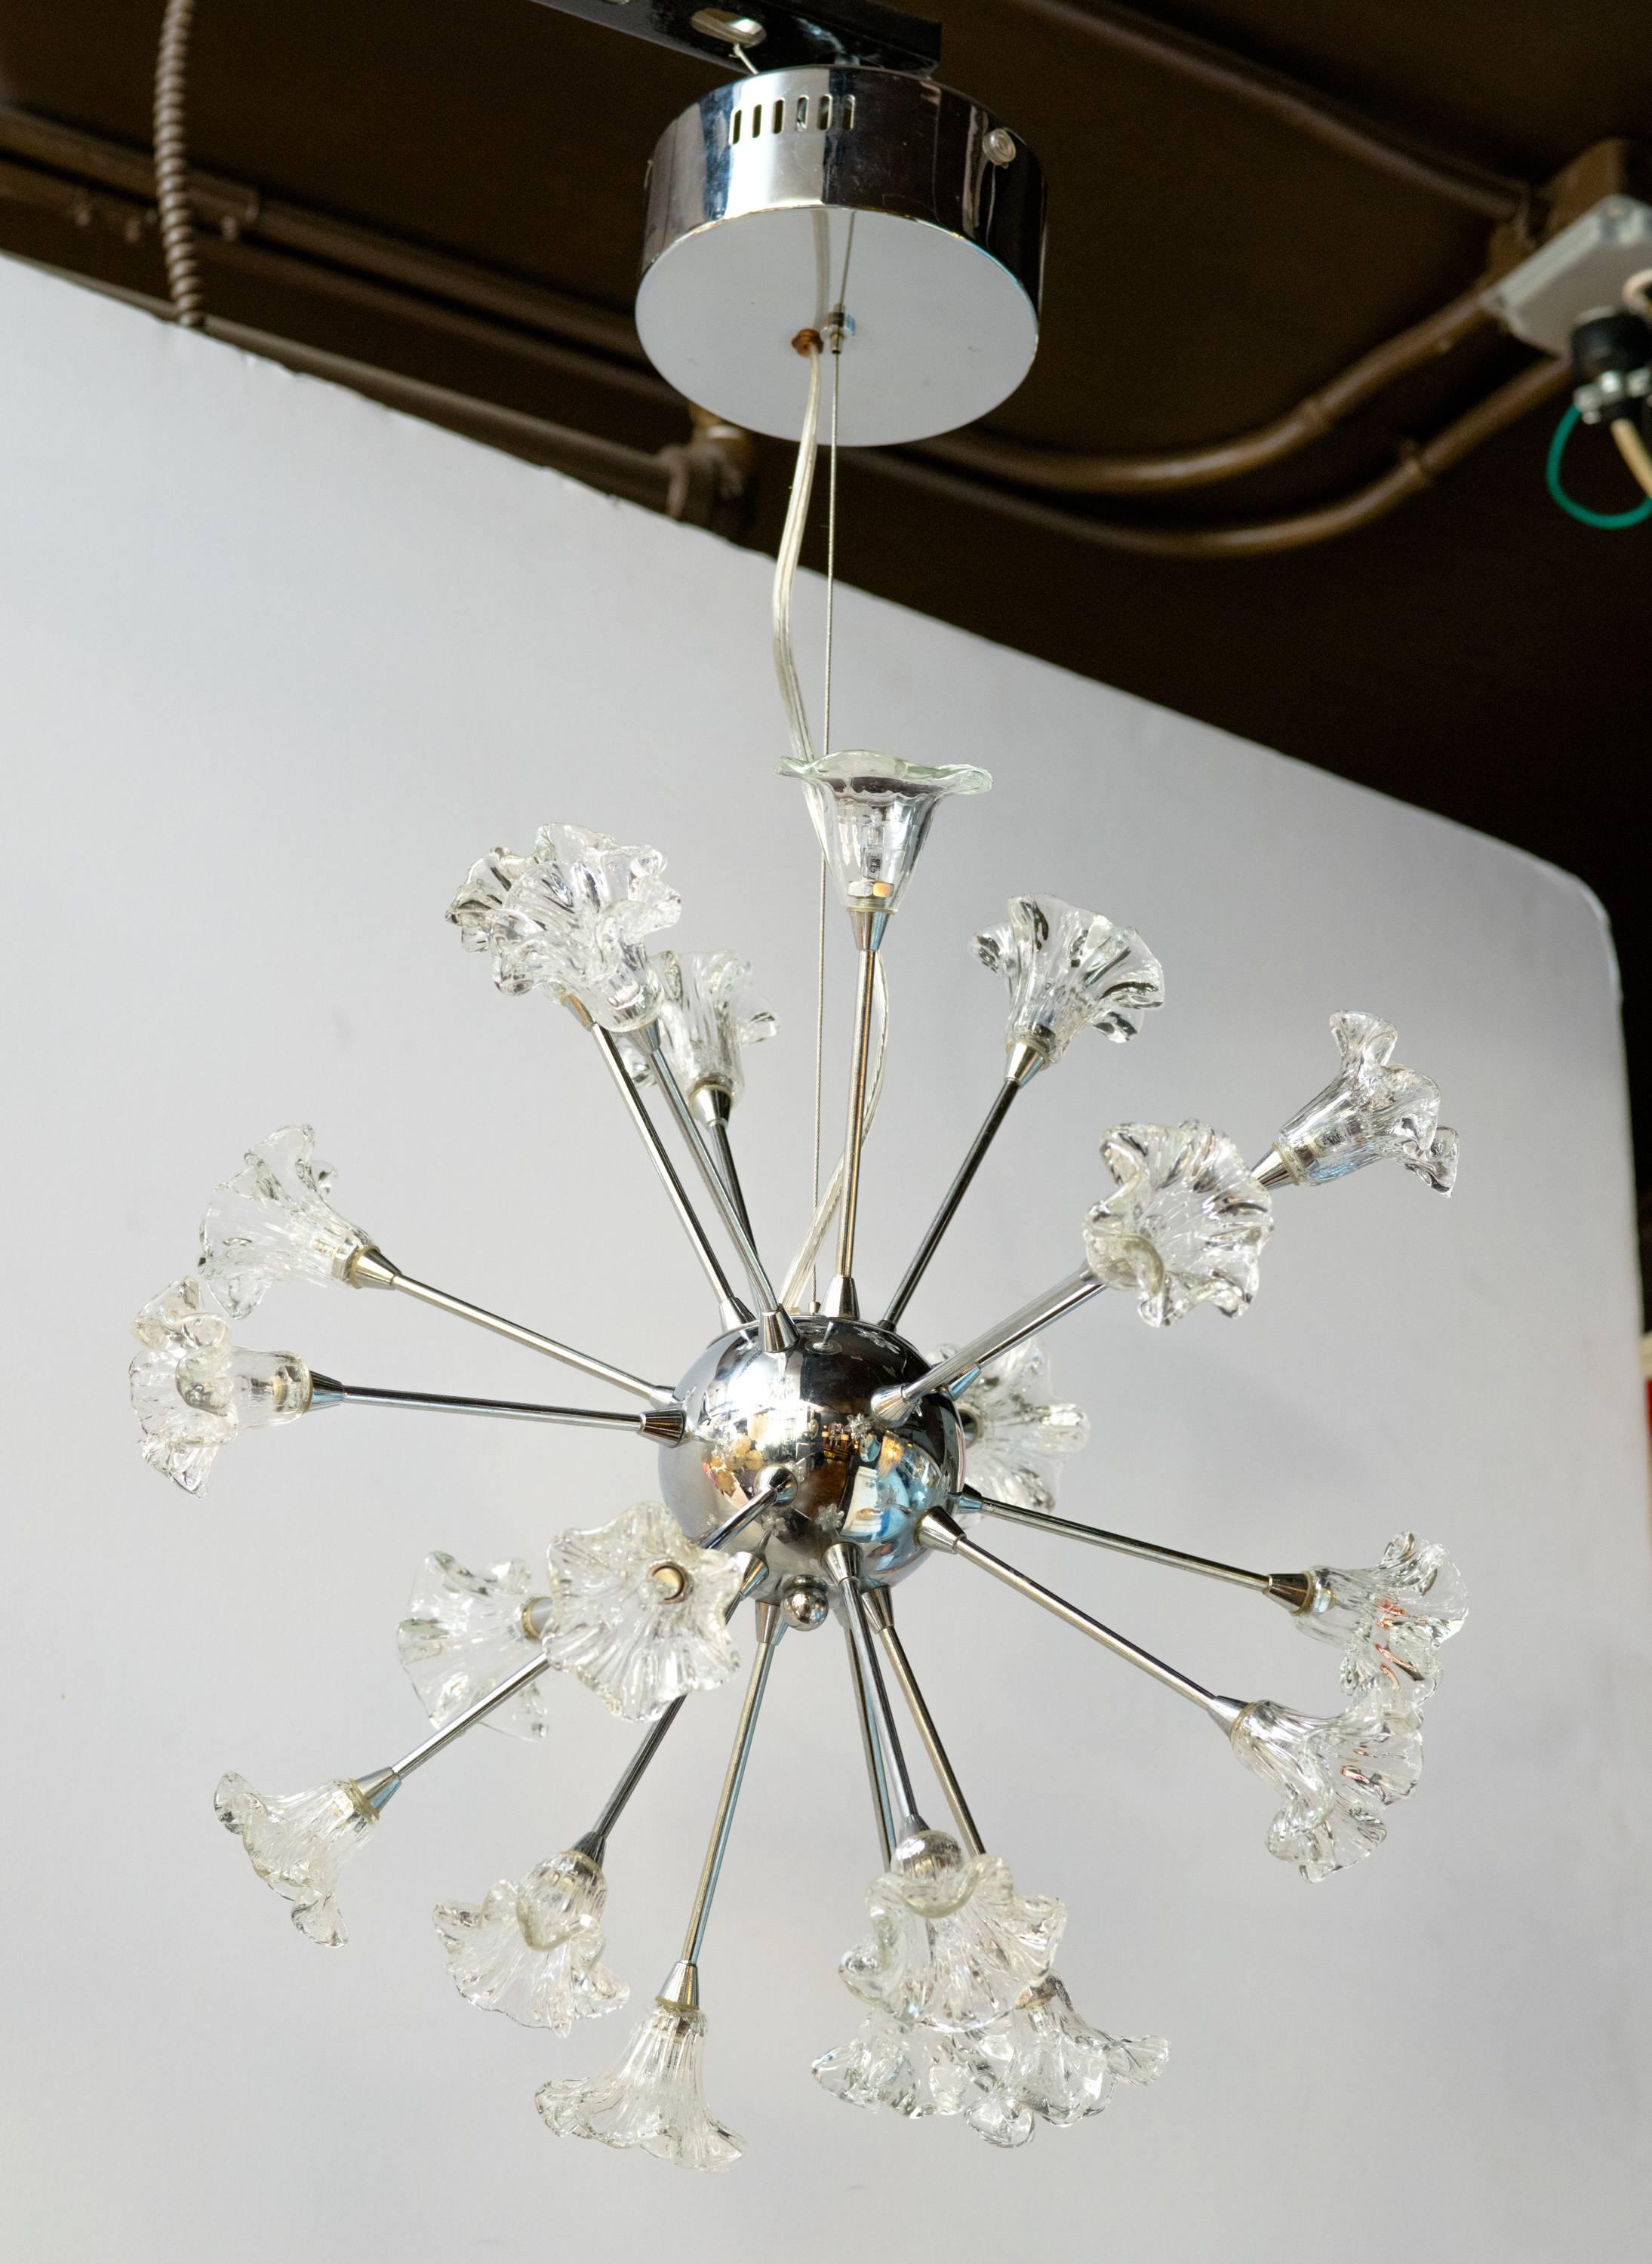 Mid-century modern chandelier with atomic design in polished chrome. Fitted with 20 blown glass shades with stylized floral designs. Each floral component is fitted with an individual light (20 total). 